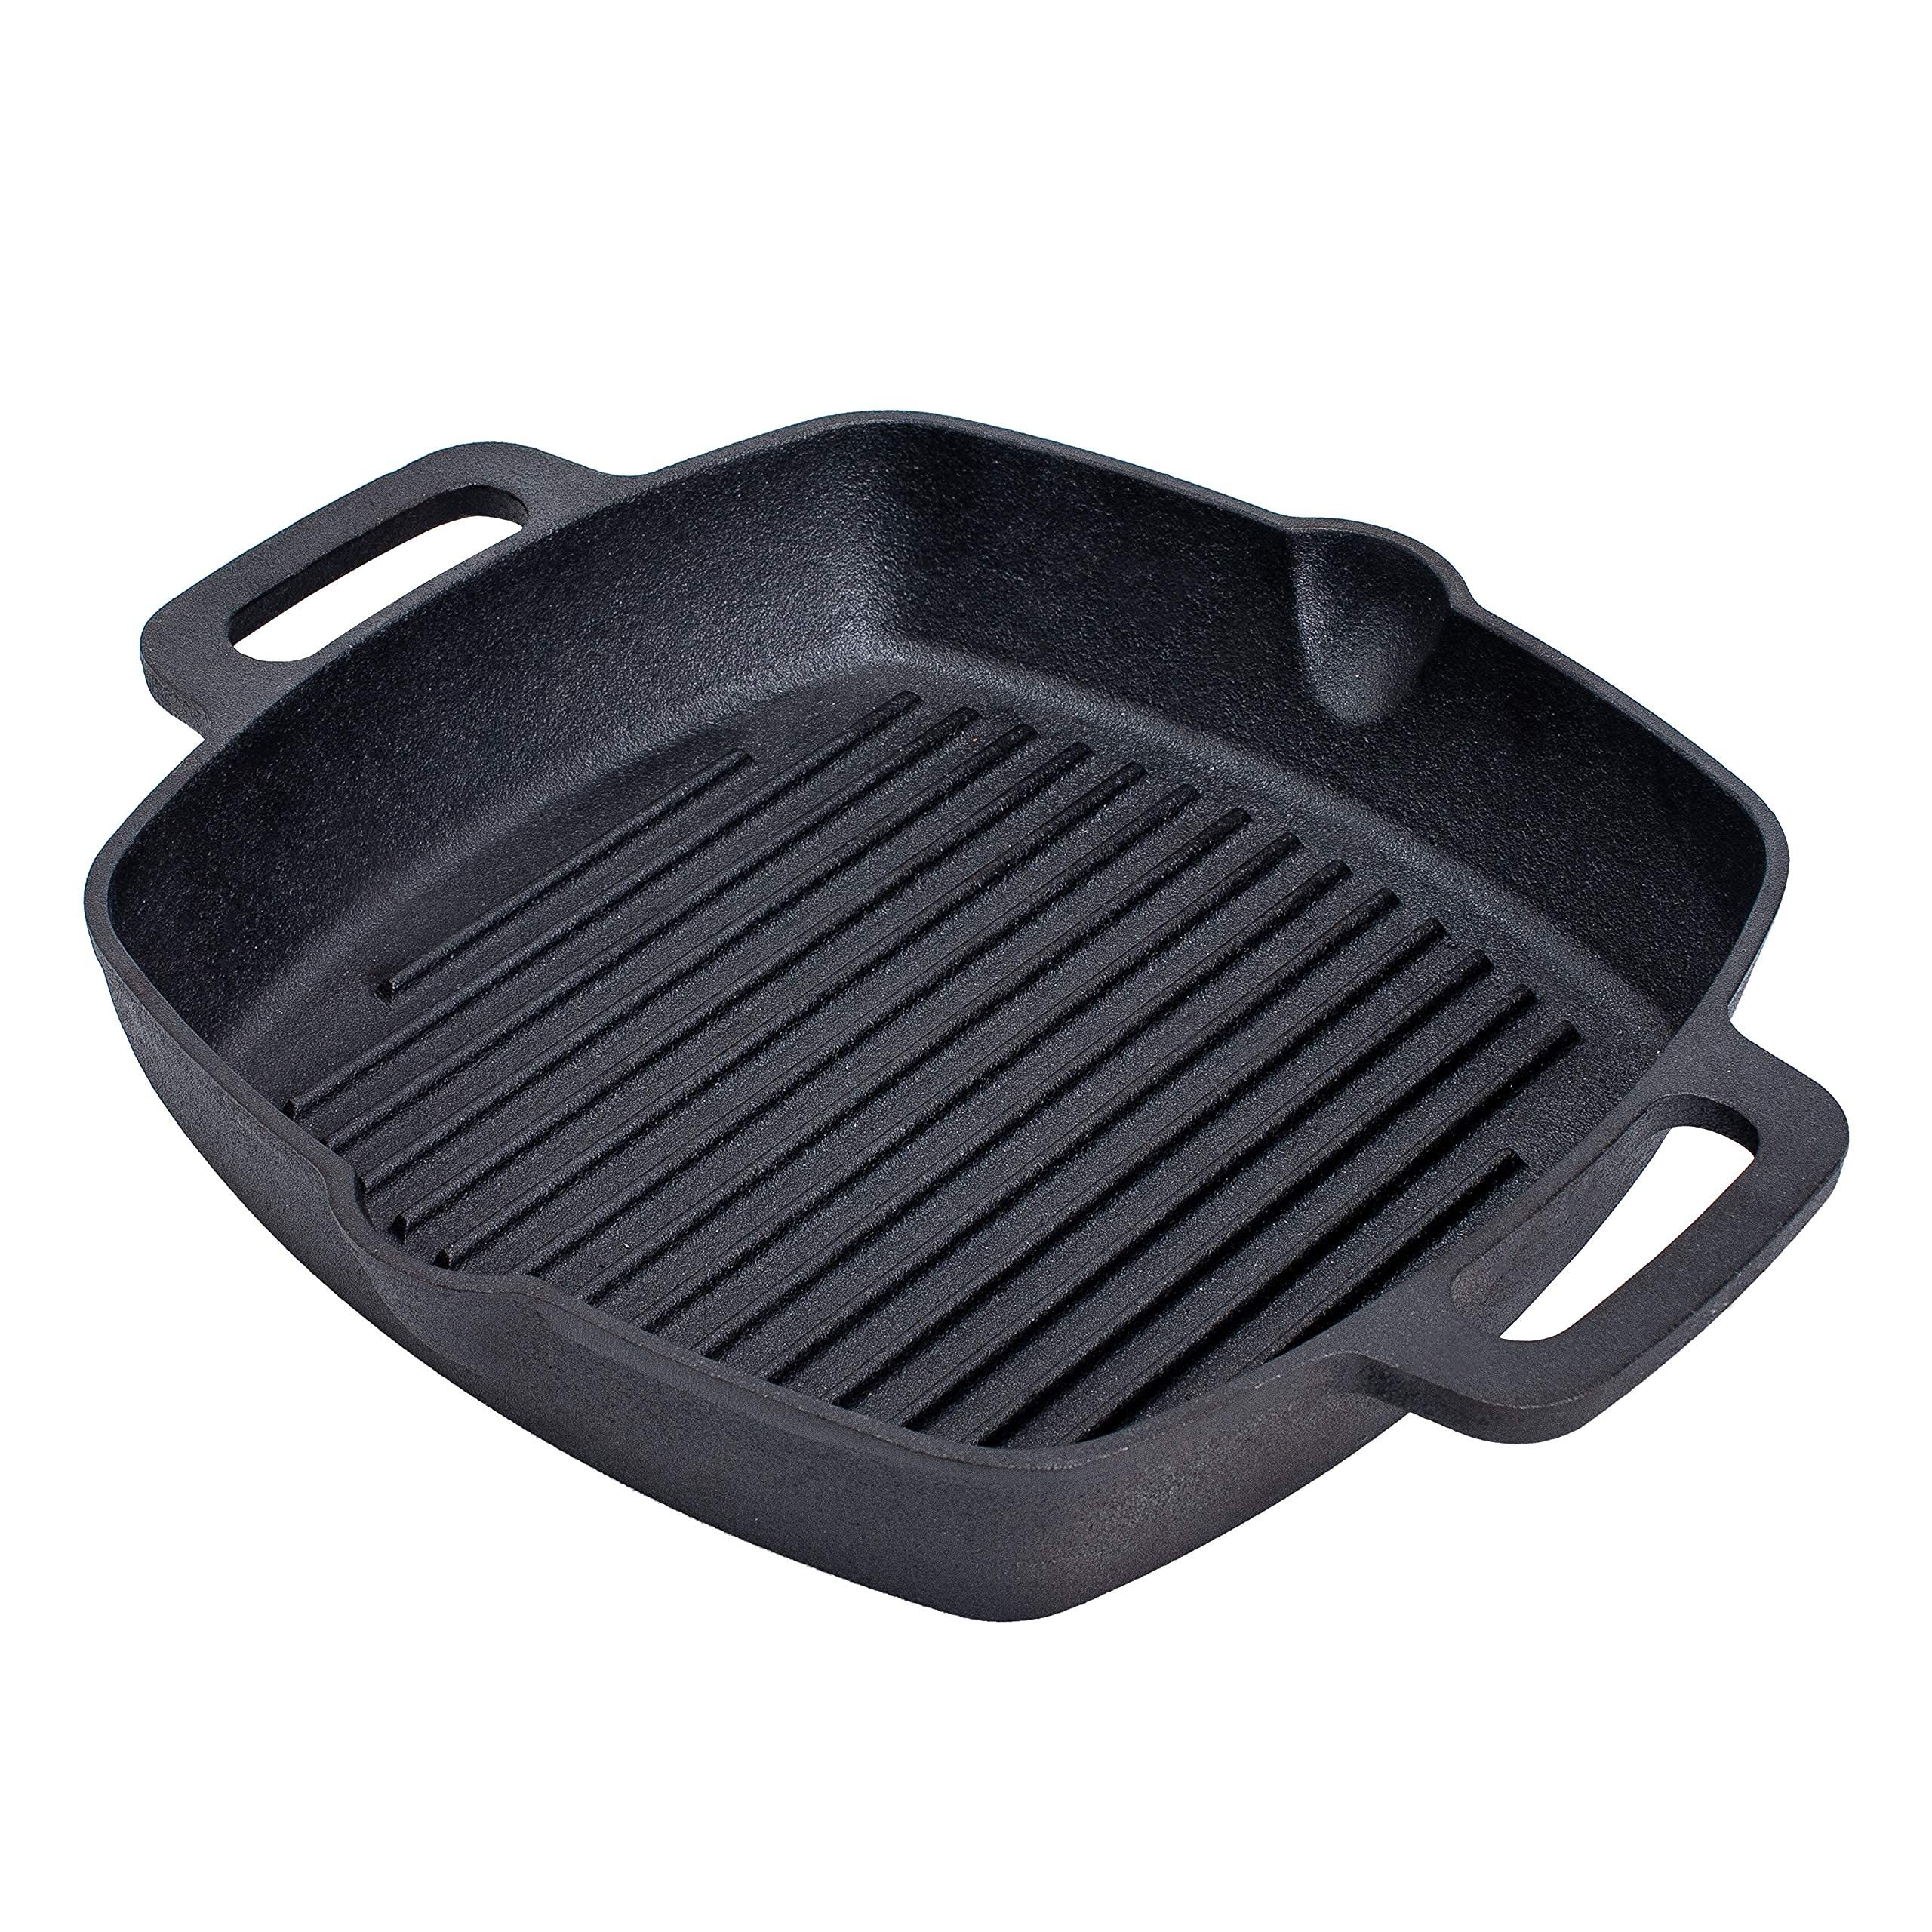 UPAN Cast Iron Sausage Pan - Pre Seasoned Square Grill for Kitchen